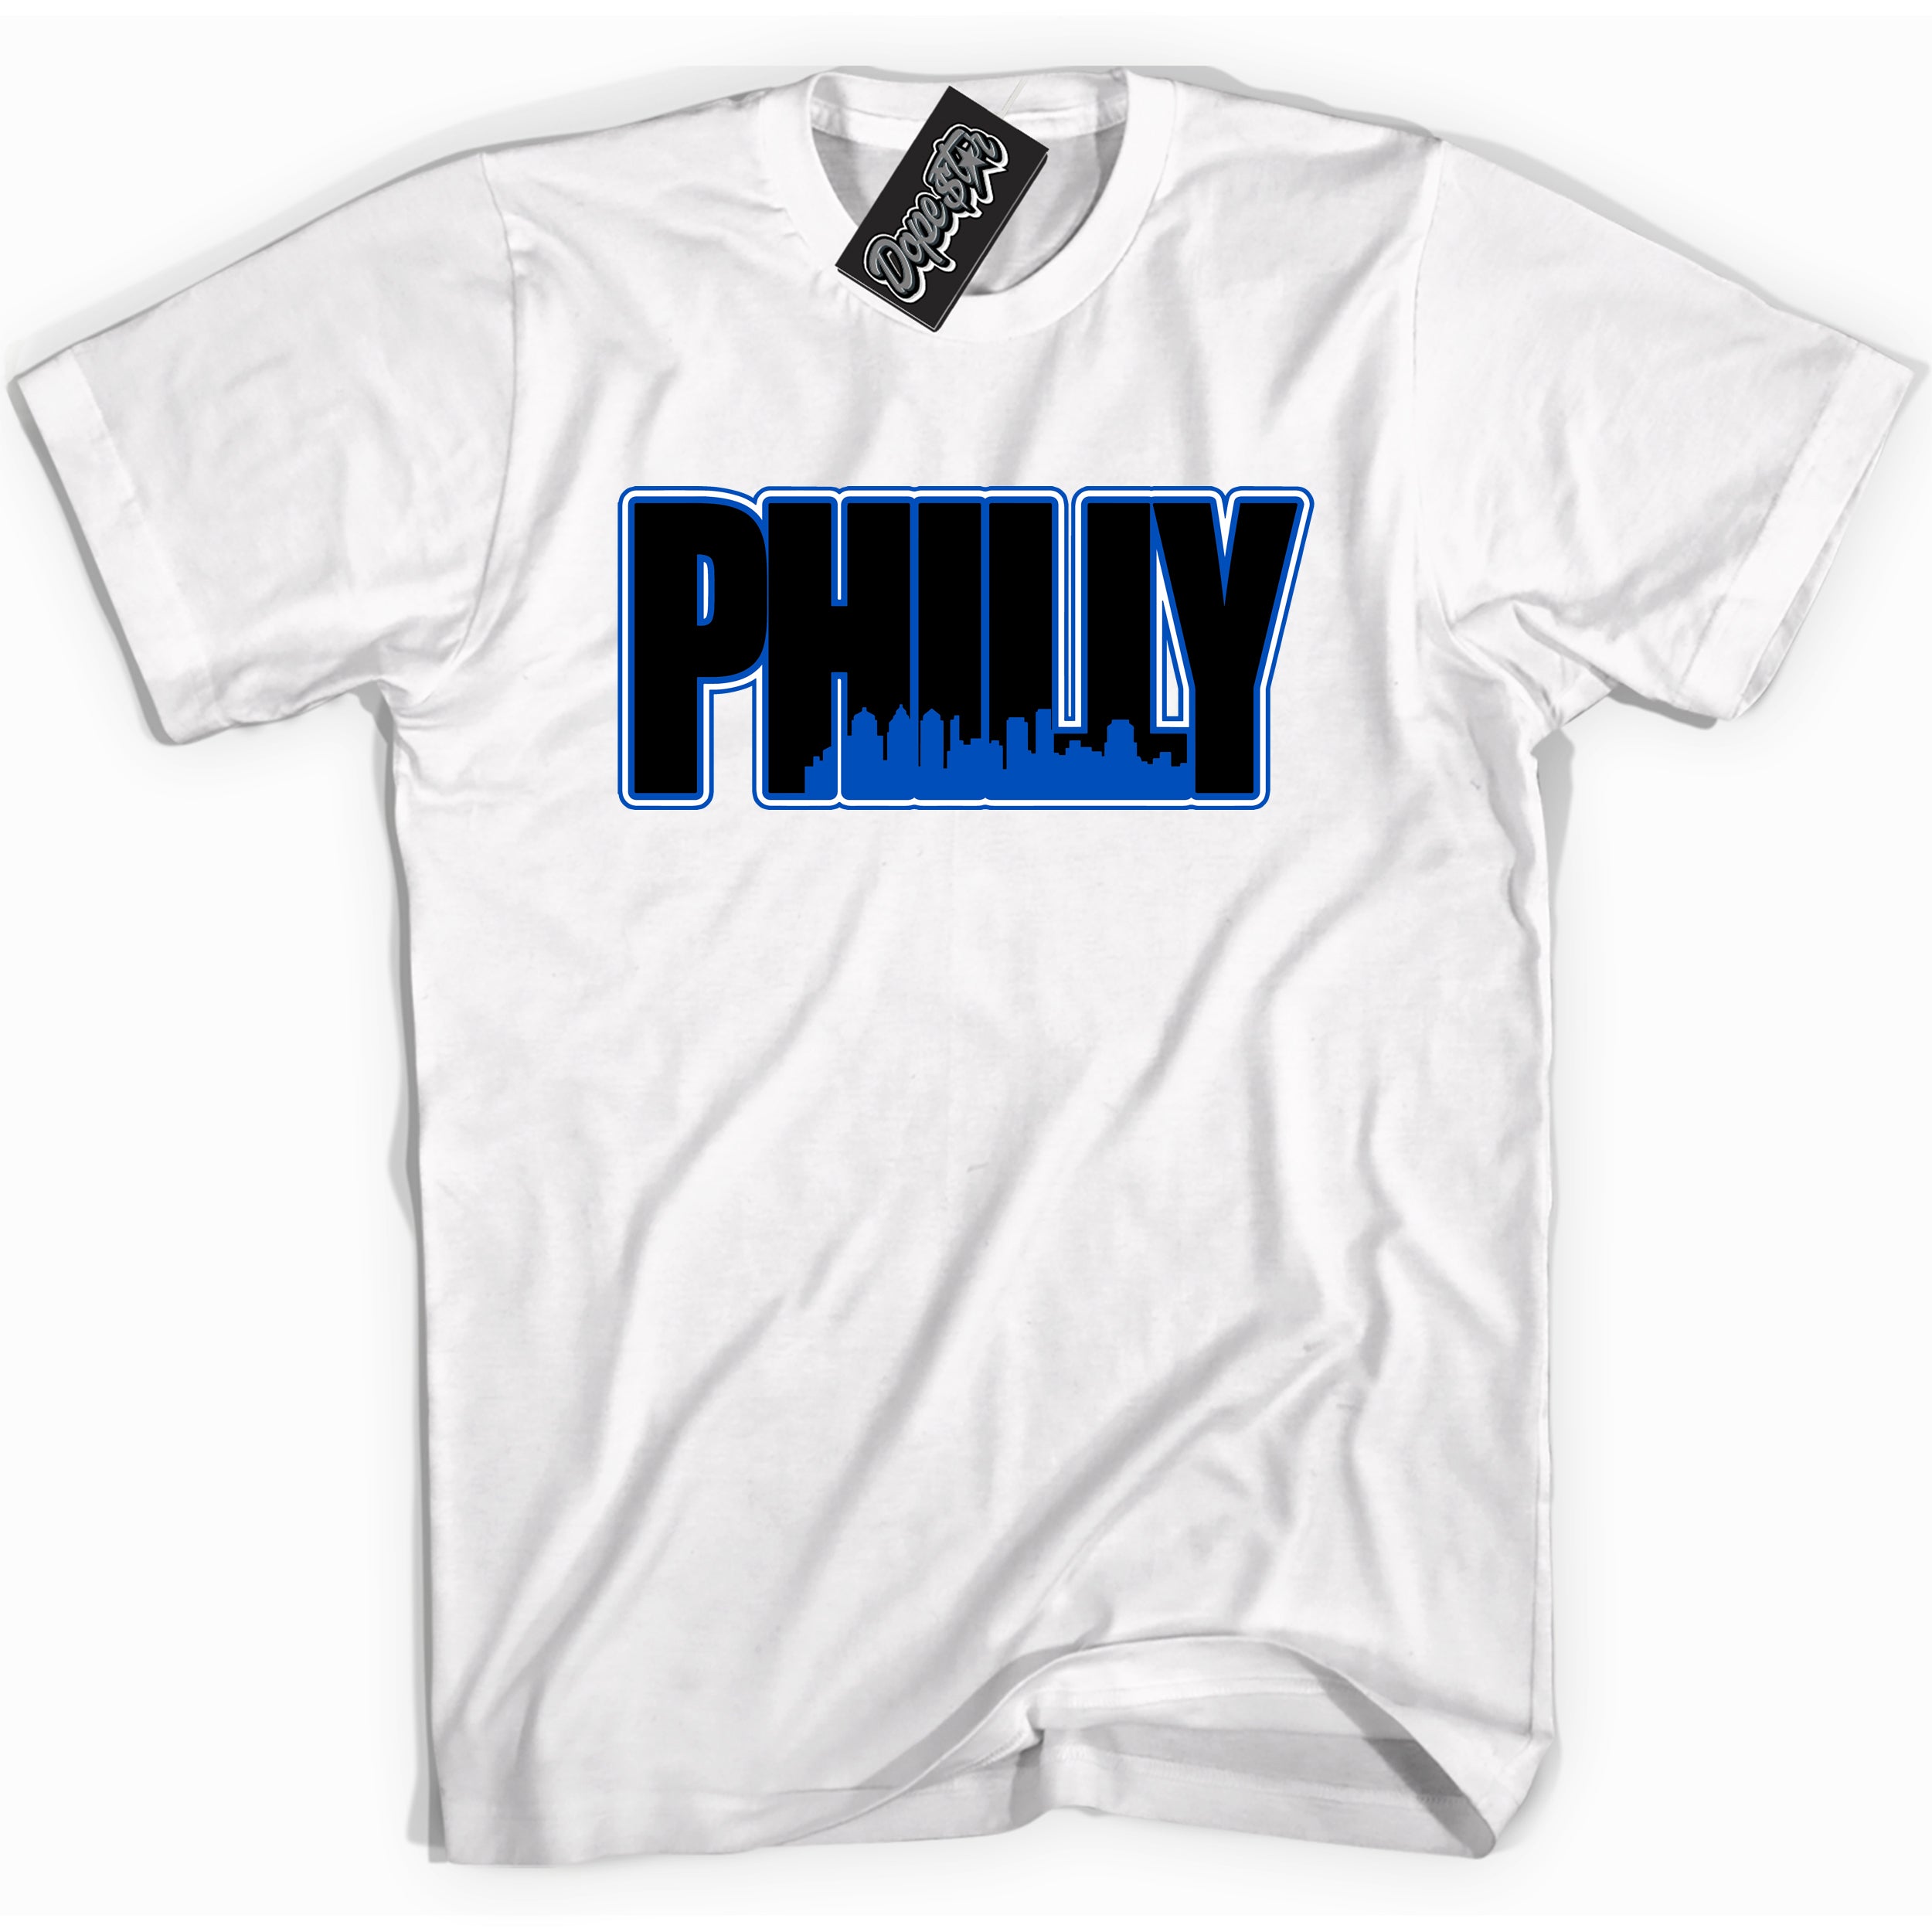 Cool White graphic tee with Philly print, that perfectly matches OG Royal Reimagined 1s sneakers 